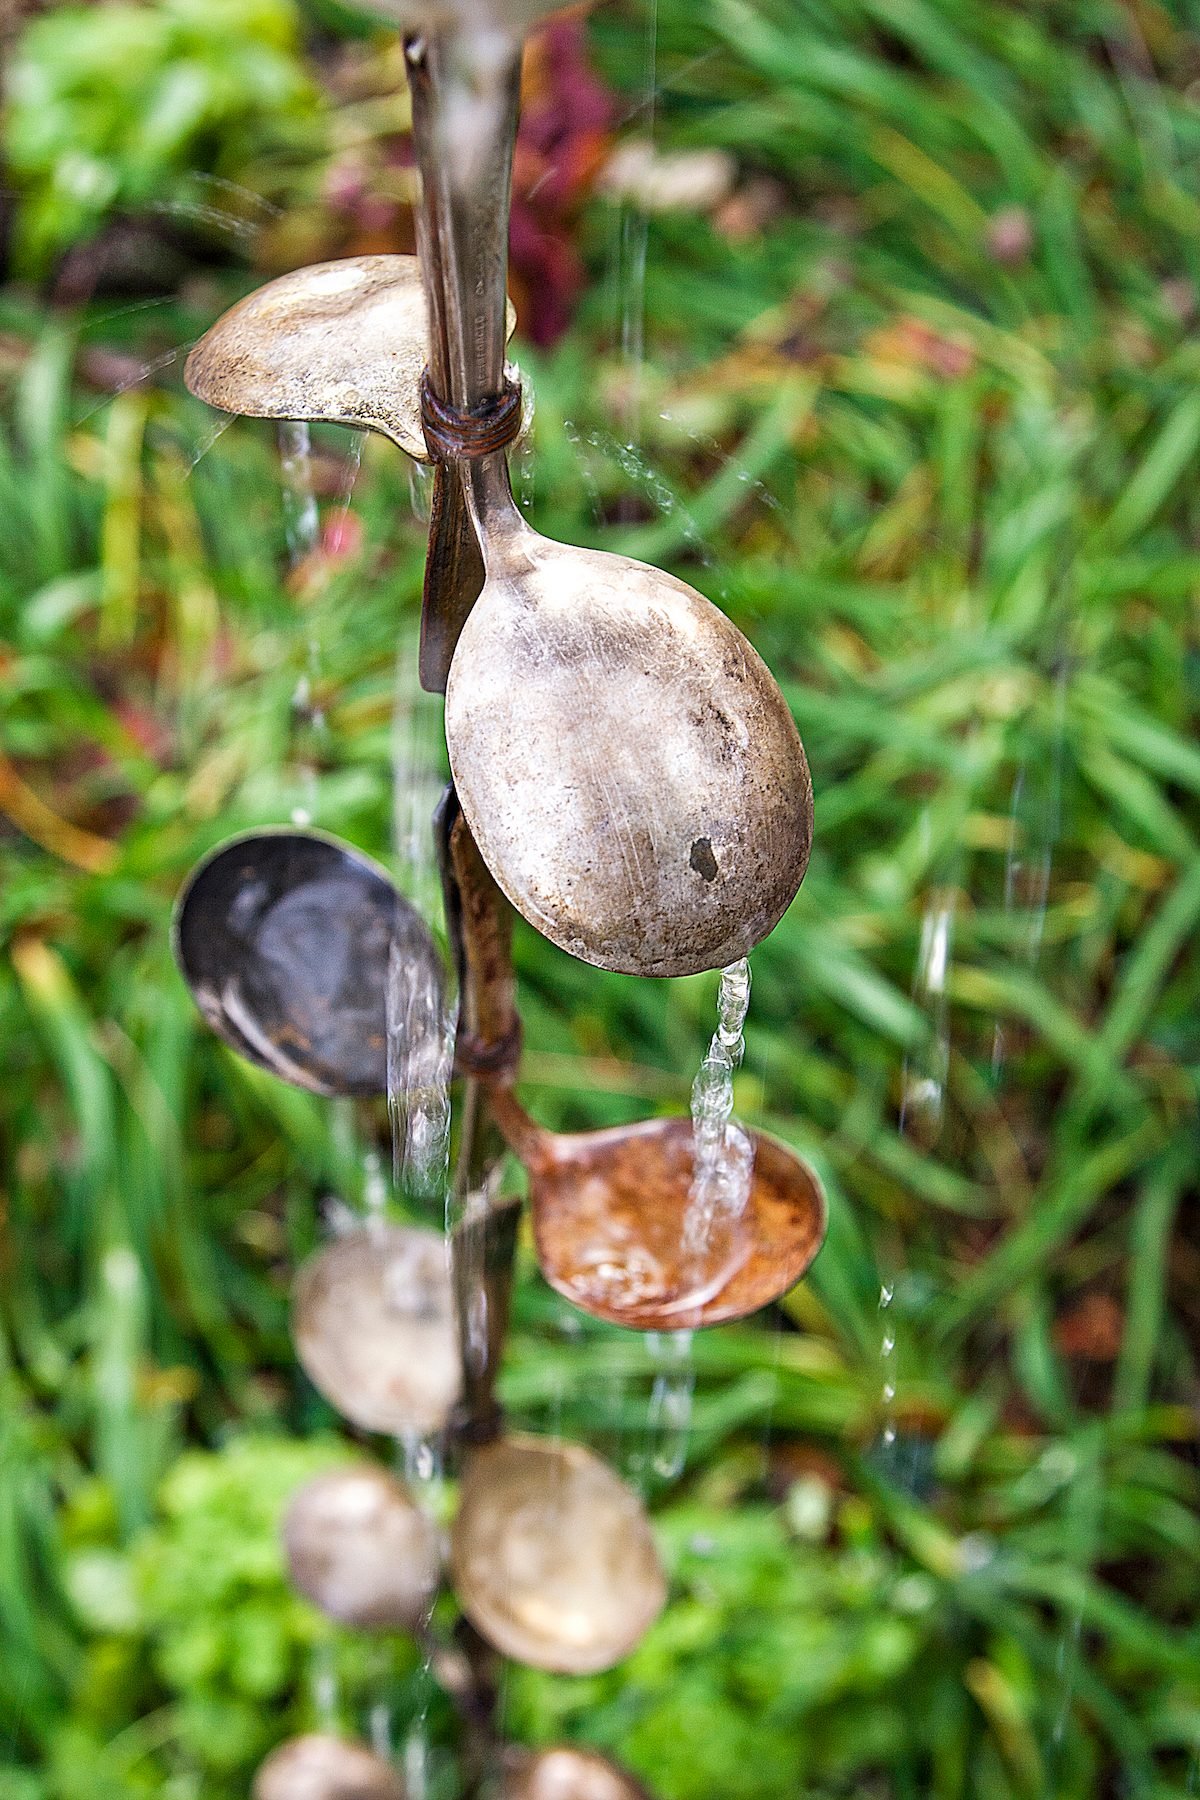 How to Make a Rain Chain With Spoons